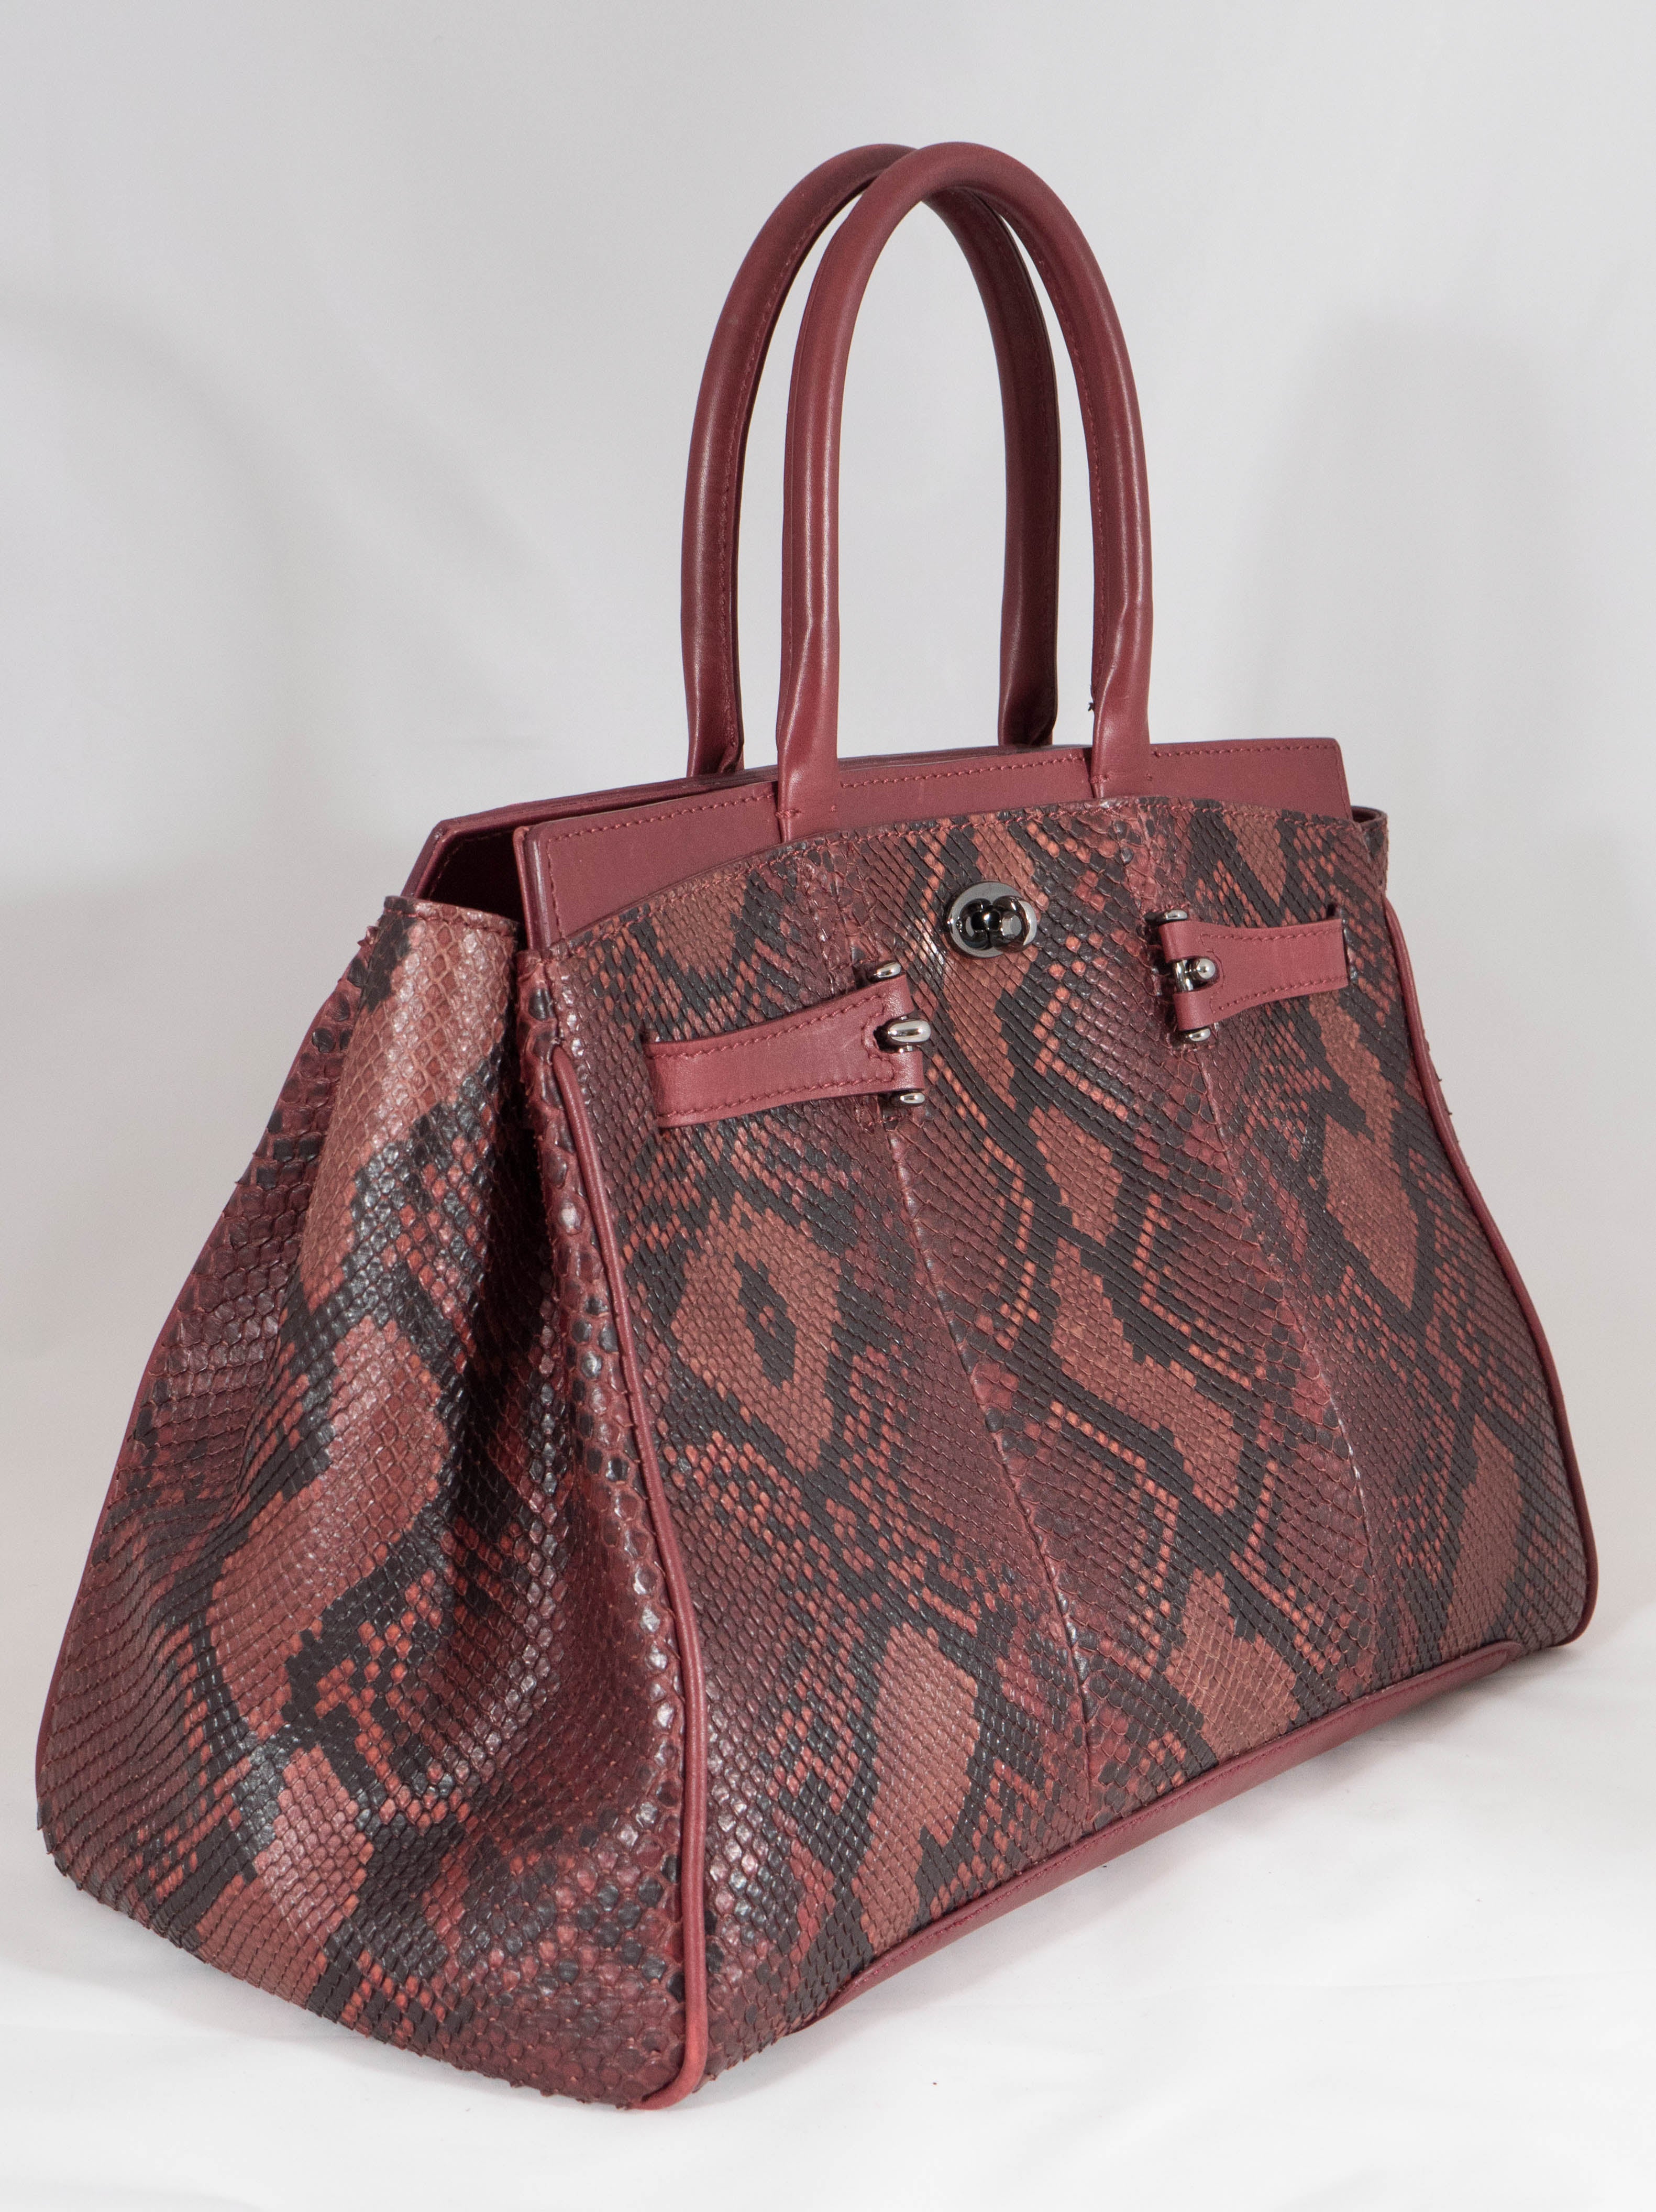 VBH Tosca Natural Sherry Python Top Handle Tote In New Condition For Sale In New York, NY